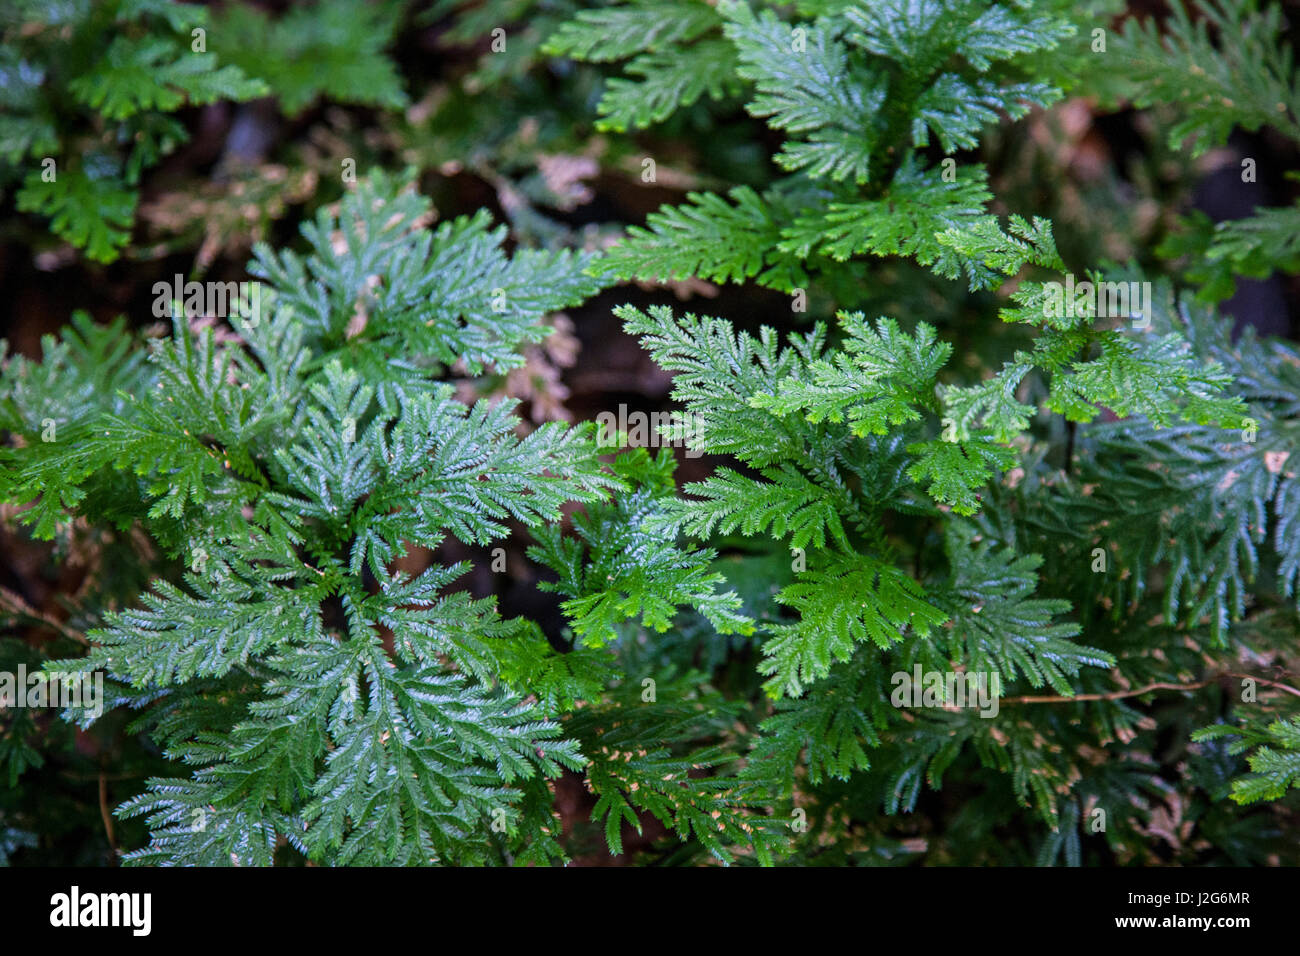 This is an interesting variety of fern, the leaves are iridescent, and the color changes at different angles. Stock Photo